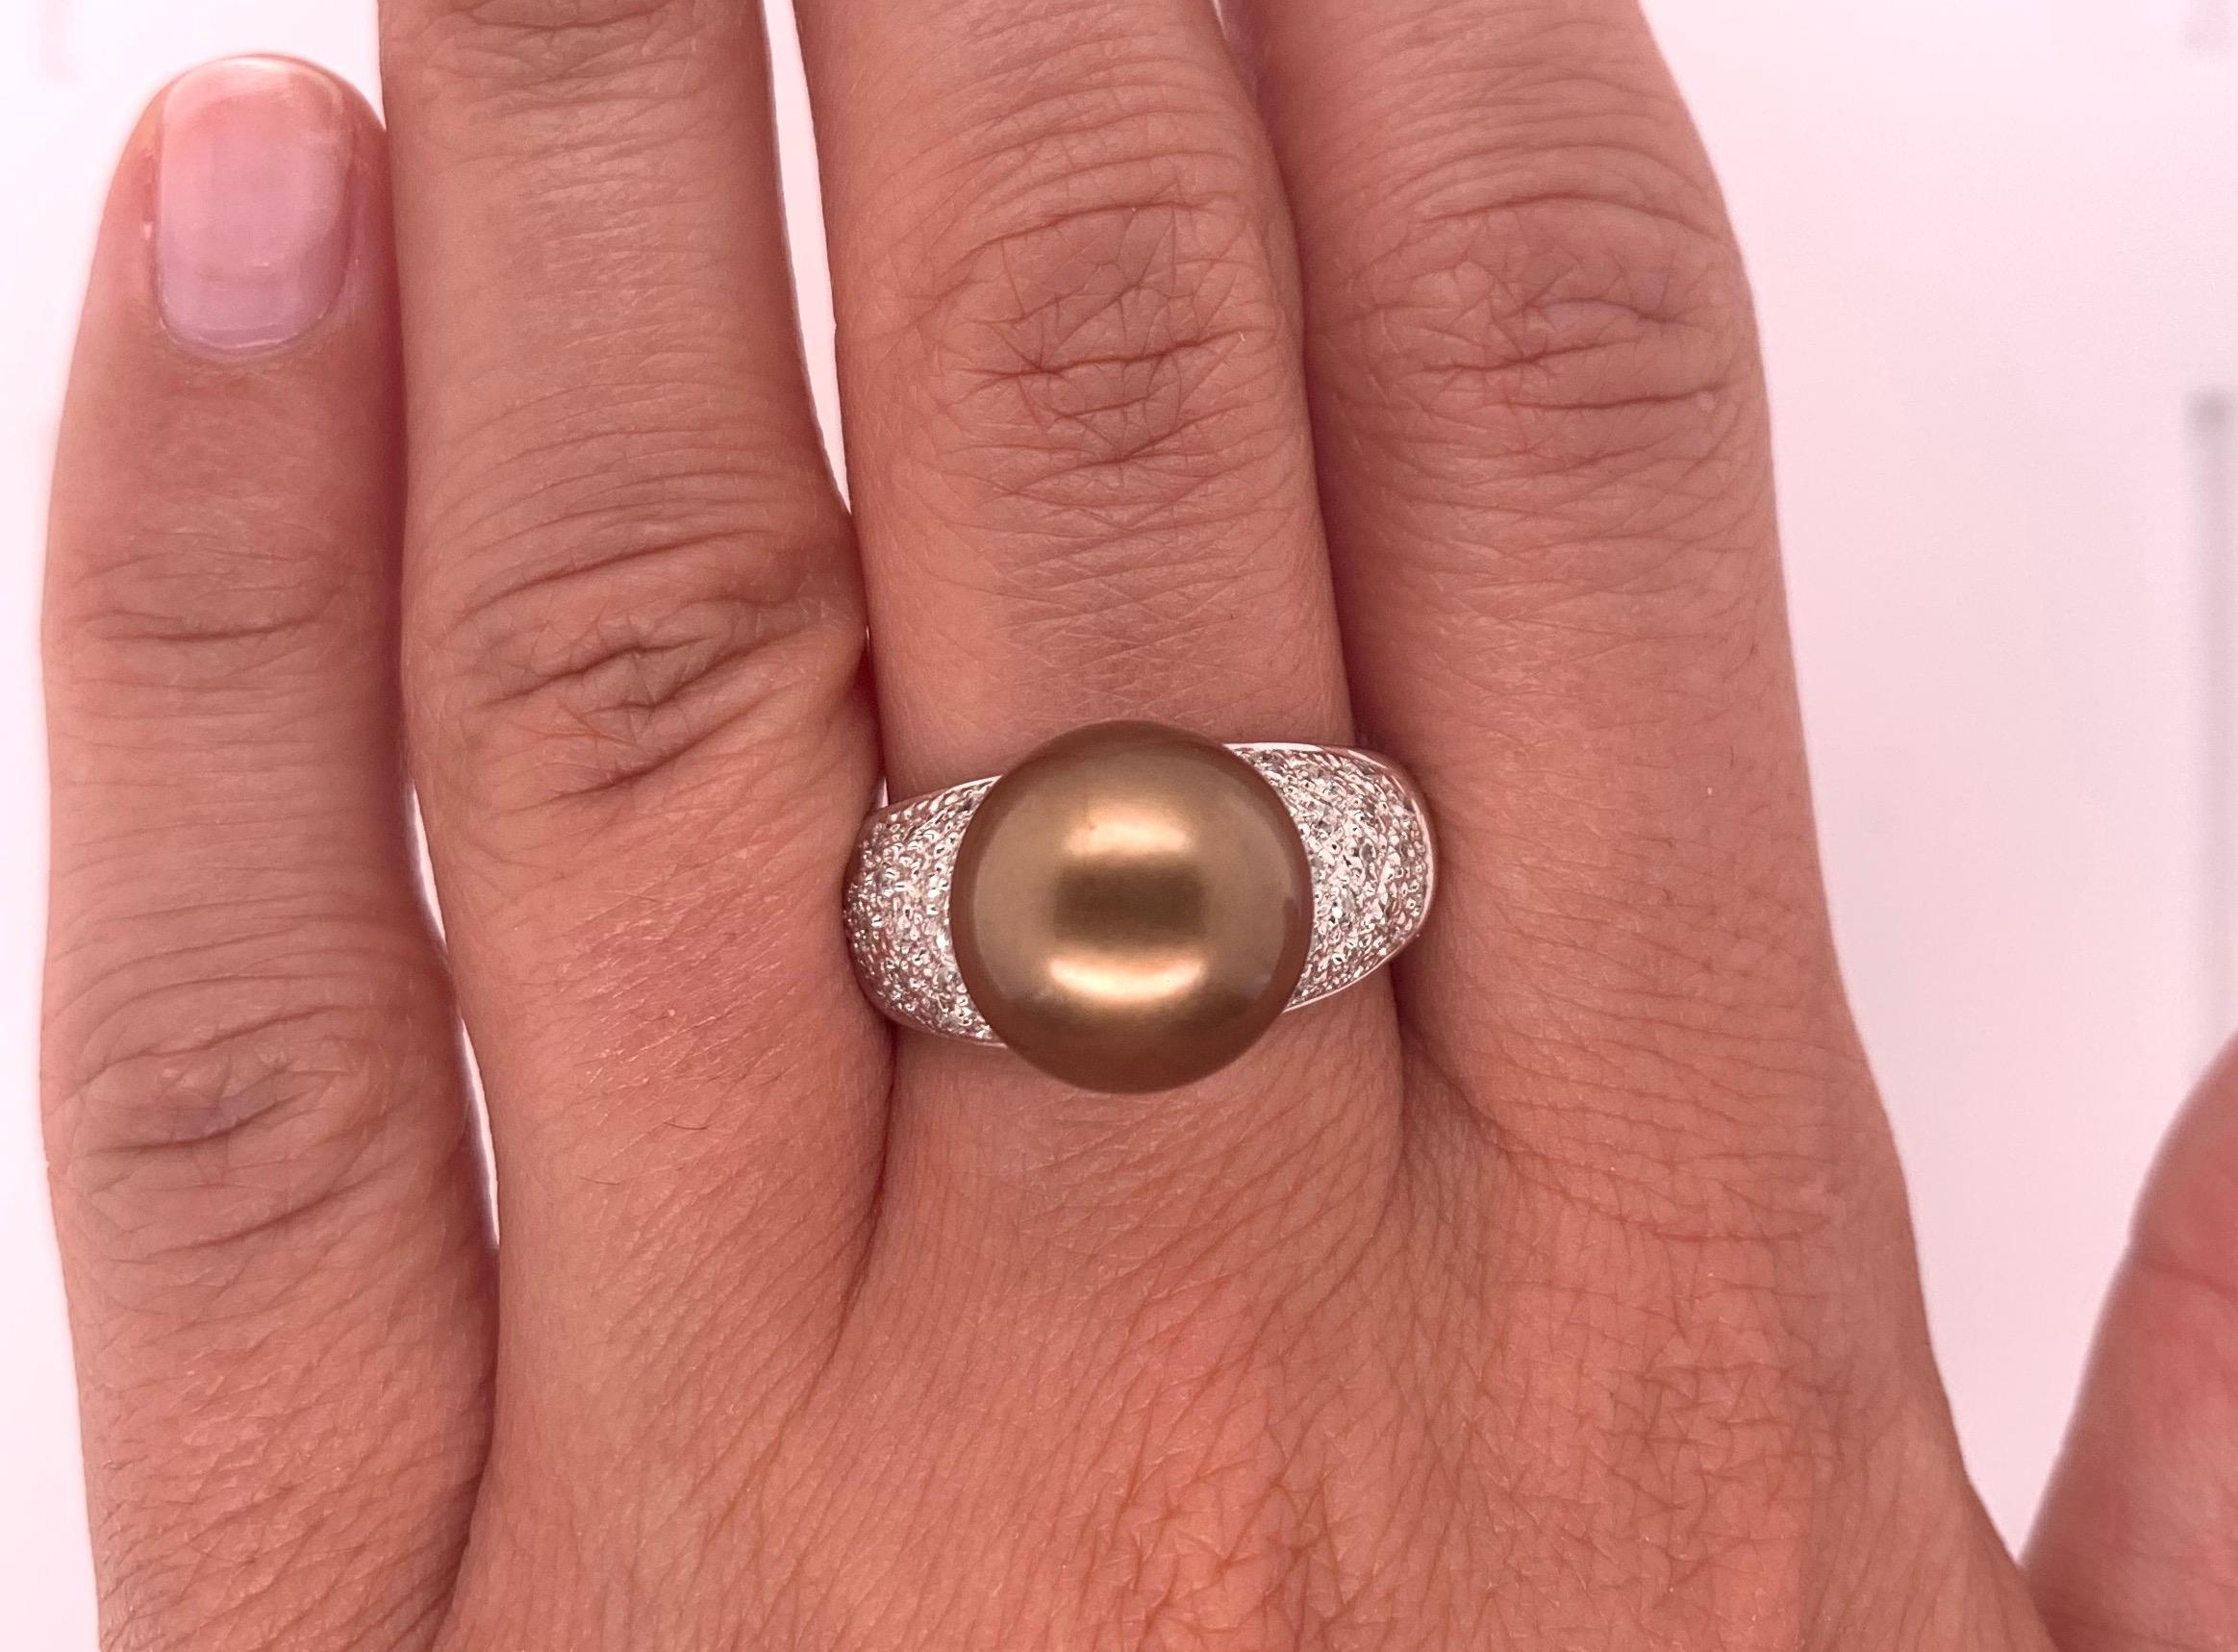 Material: 14K White Gold
Gemstone Details: 1 Round Pearl at 2.15 Carats Total
Diamond Details: 42 Brilliant Round White Diamonds at 0.26 Carats. SI Clarity / H-I Color. 

Ring Size: 7. Alberto offers complimentary sizing on all rings.

Fine one-of-a